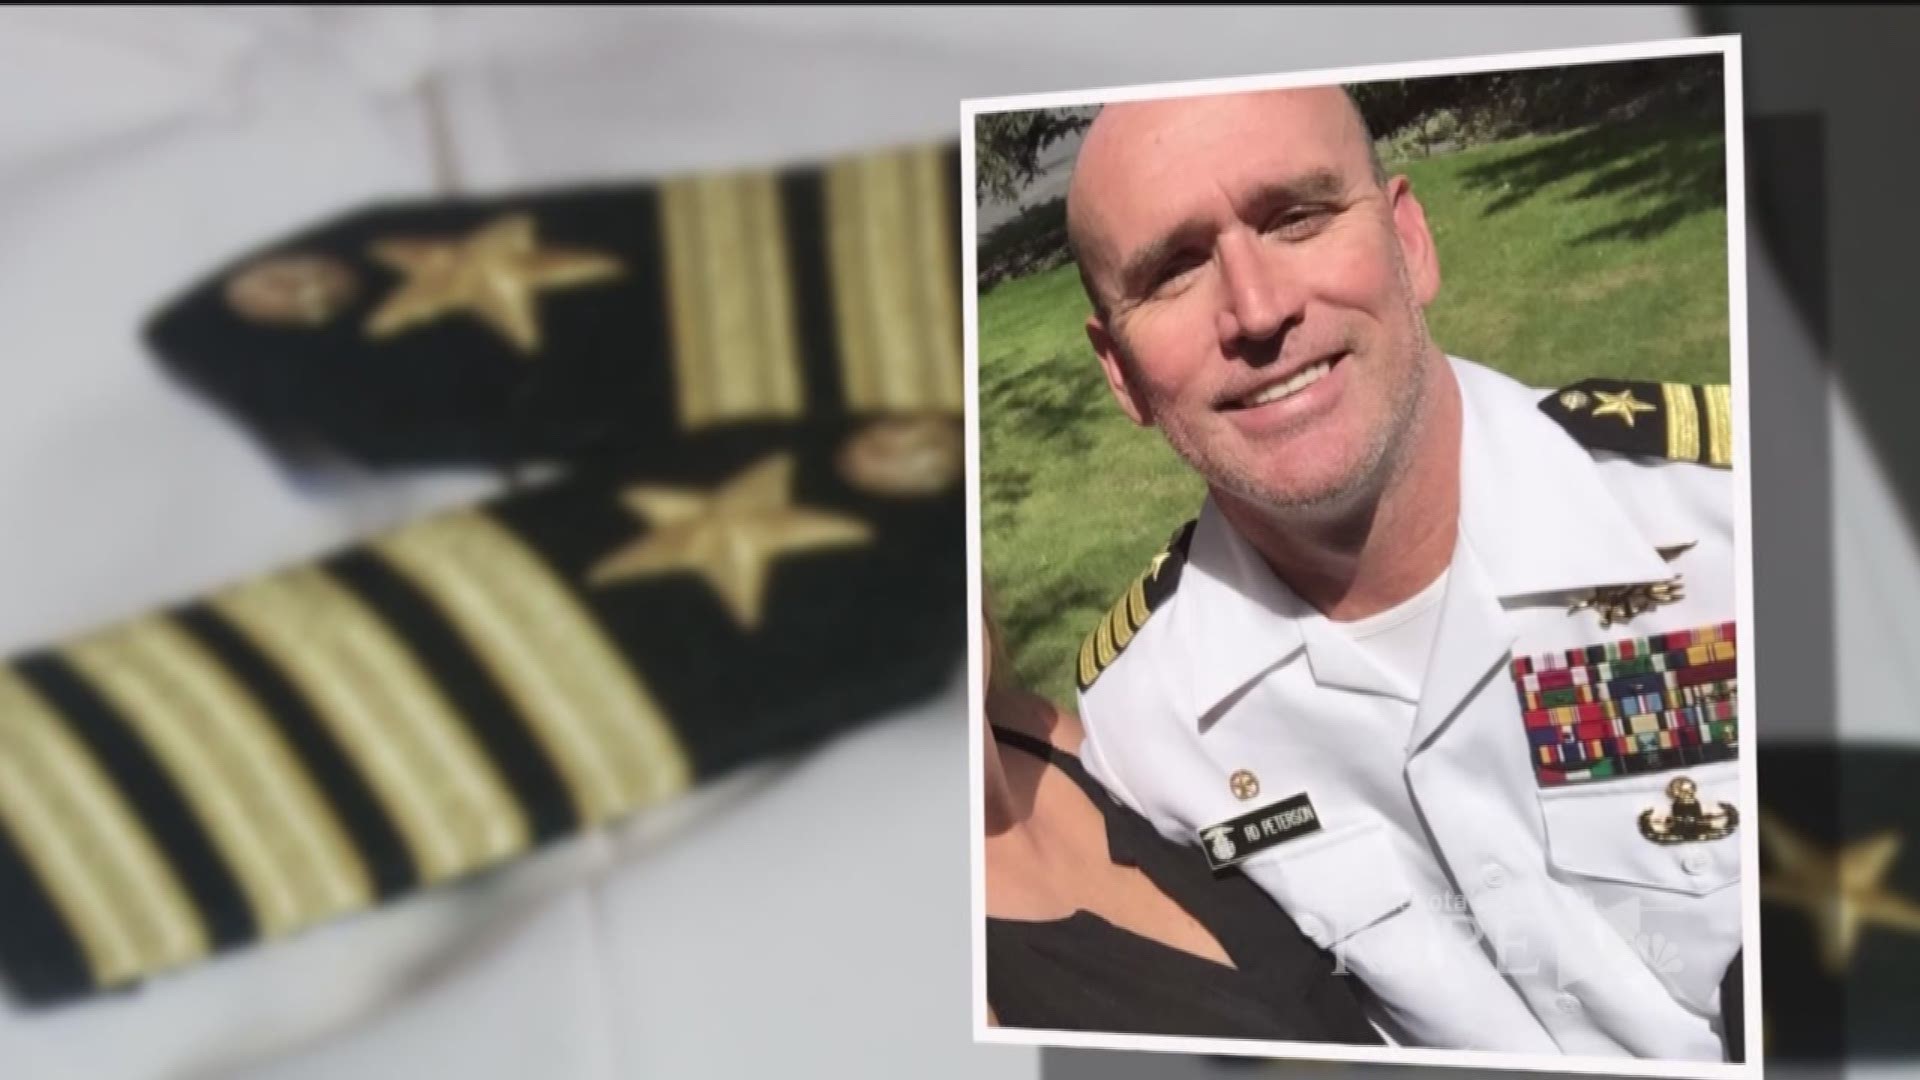 A phony war hero exposed by KARE 11 who has been accused by women across the country of using fake identities to steal their money has been arrested again. http://kare11.tv/2qVTbRH